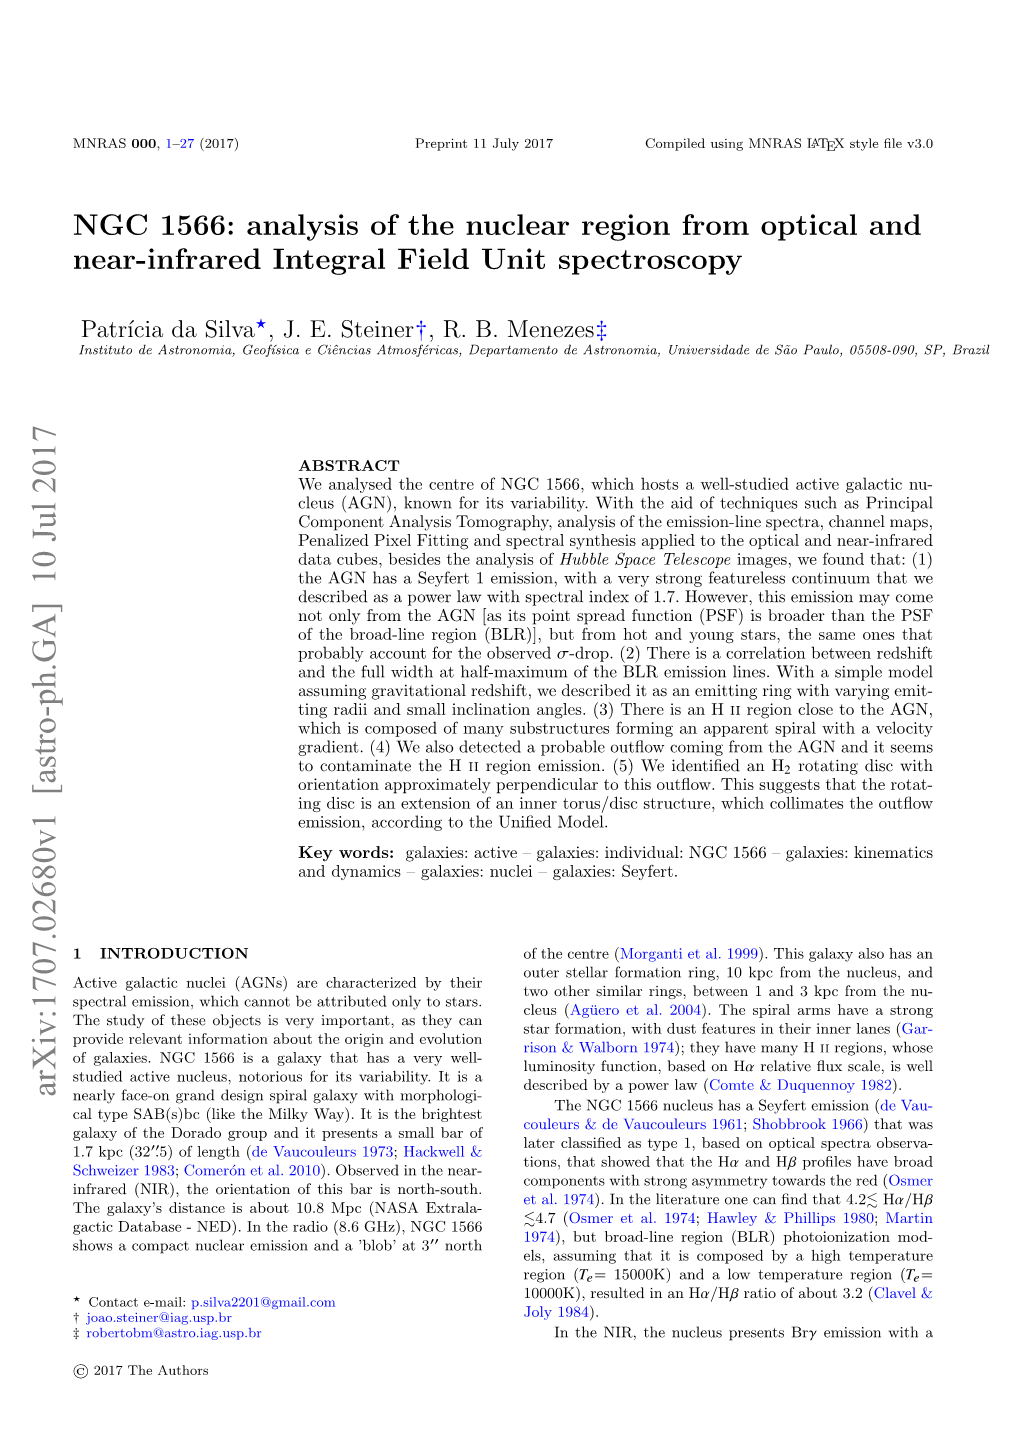 NGC 1566: Analysis of the Nuclear Region from Optical and Near-Infrared Integral Field Unit Spectroscopy